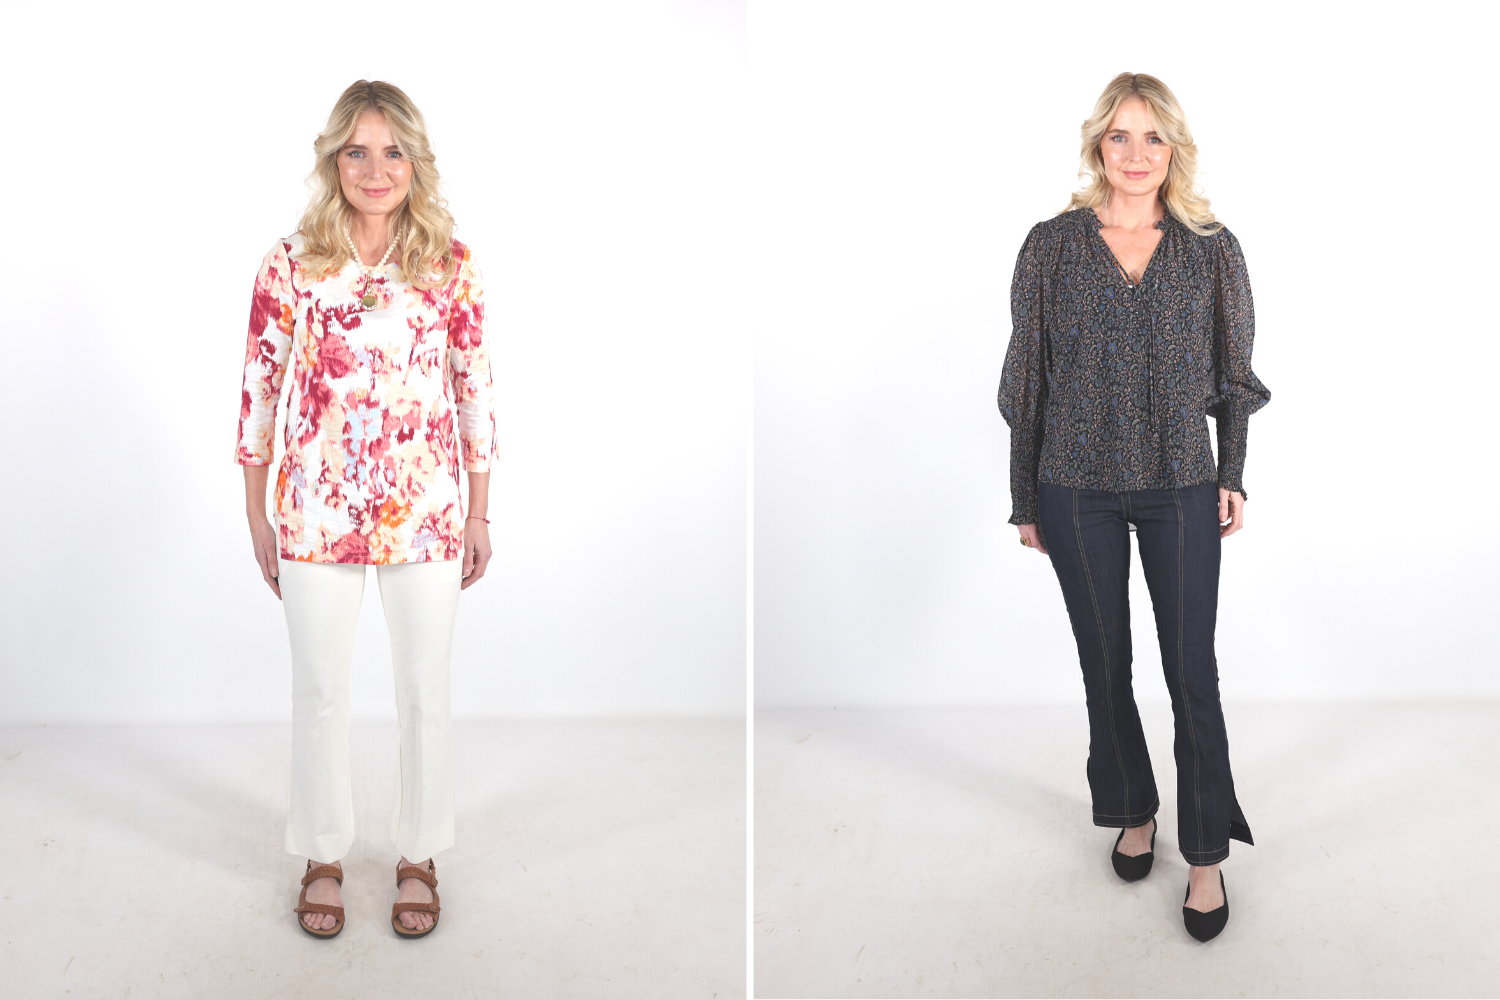 How to look younger, Erin Busbee in a before and after picture wearing a floral tee, white pants, and old lady sandals on the left and a Veronica Beard floral blouse with dark wash flare jeans and Rothy's flats on the right